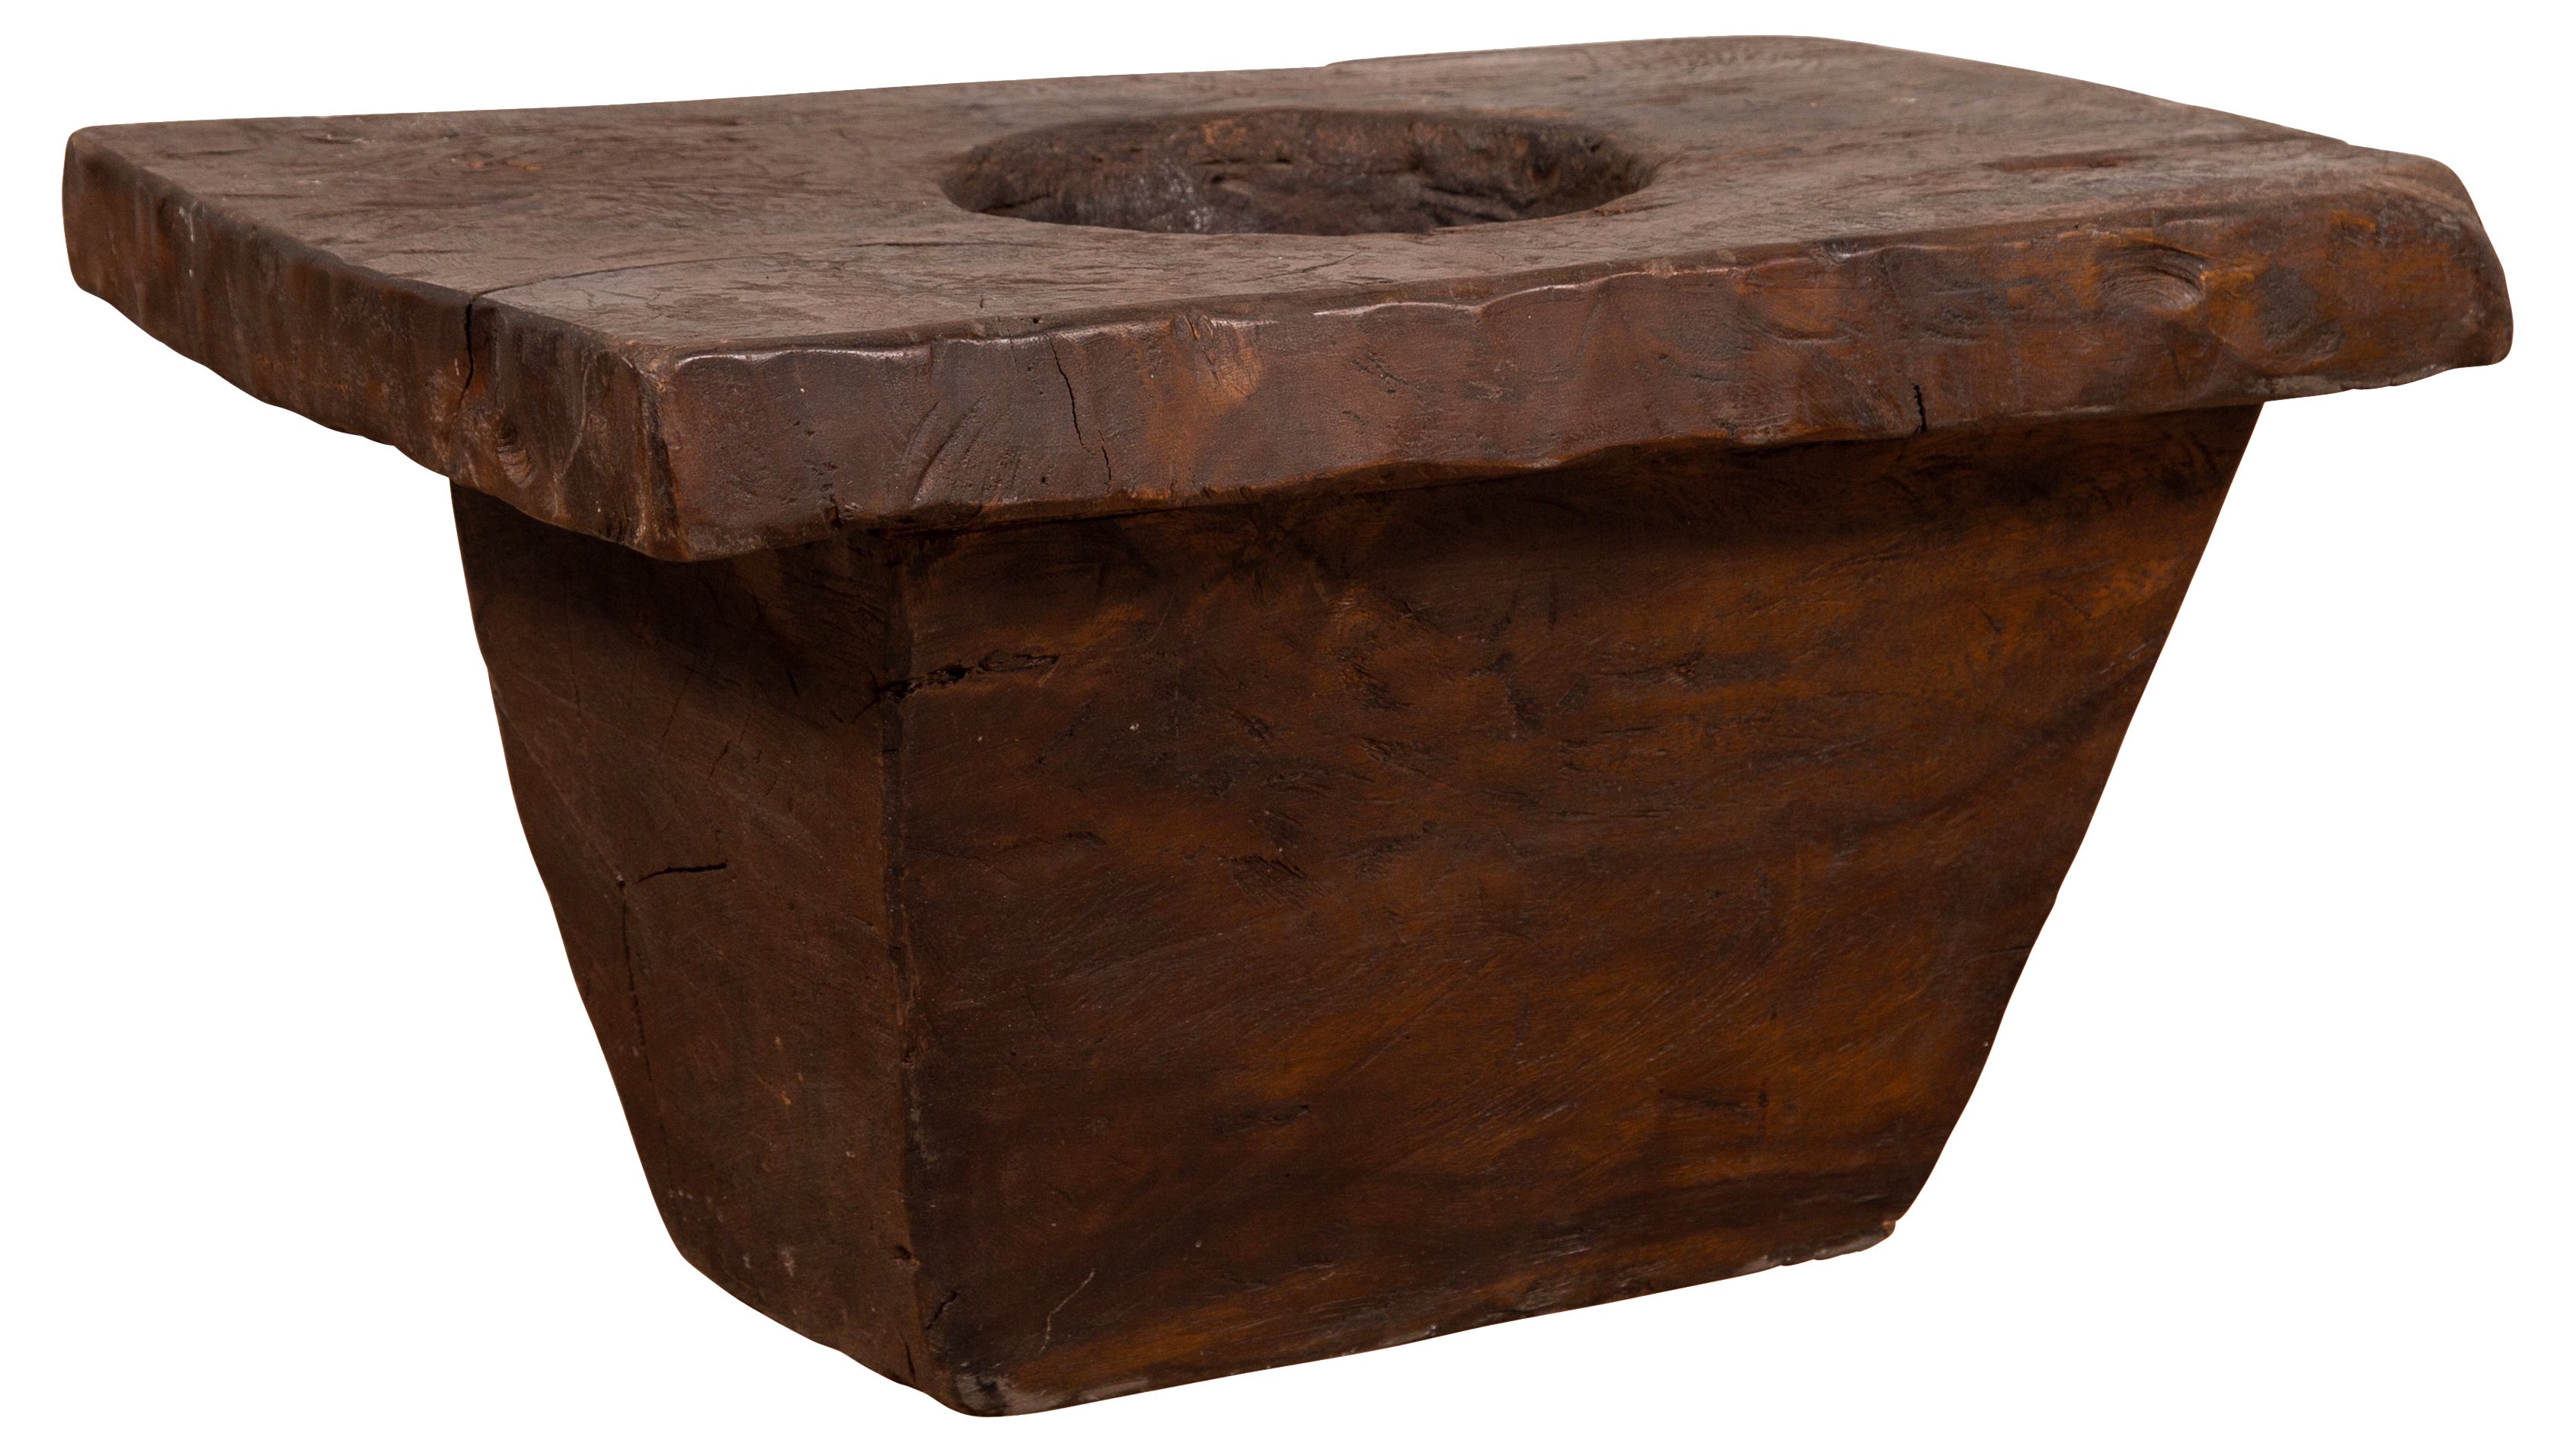 Rustic Indonesian Wooden Planter~P77555850